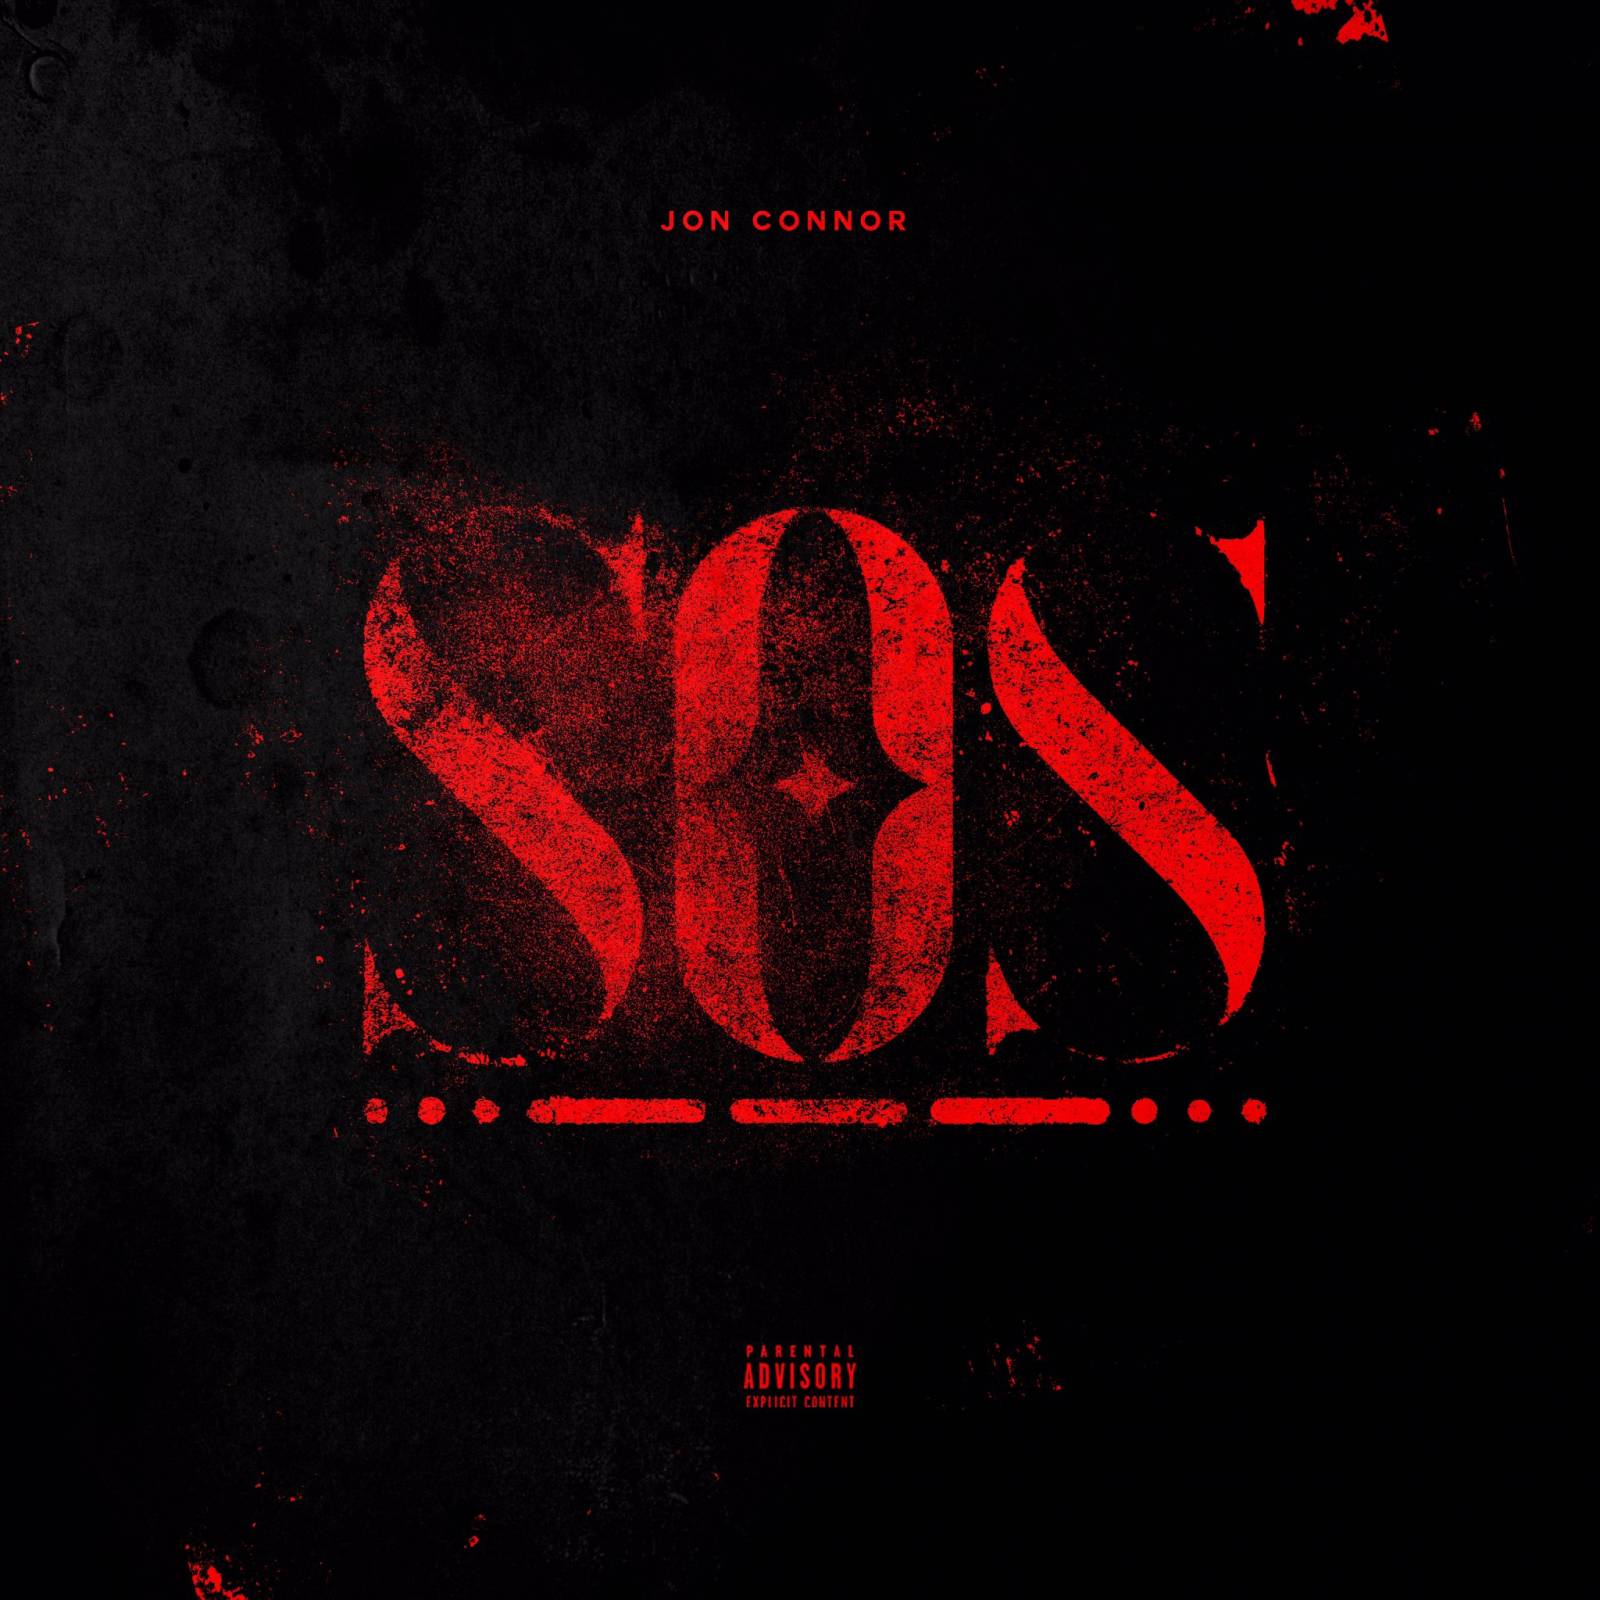 Jon Connor Returns With 'SOS' Album Following Stint On Dr. Dre's Aftermath Entertainment